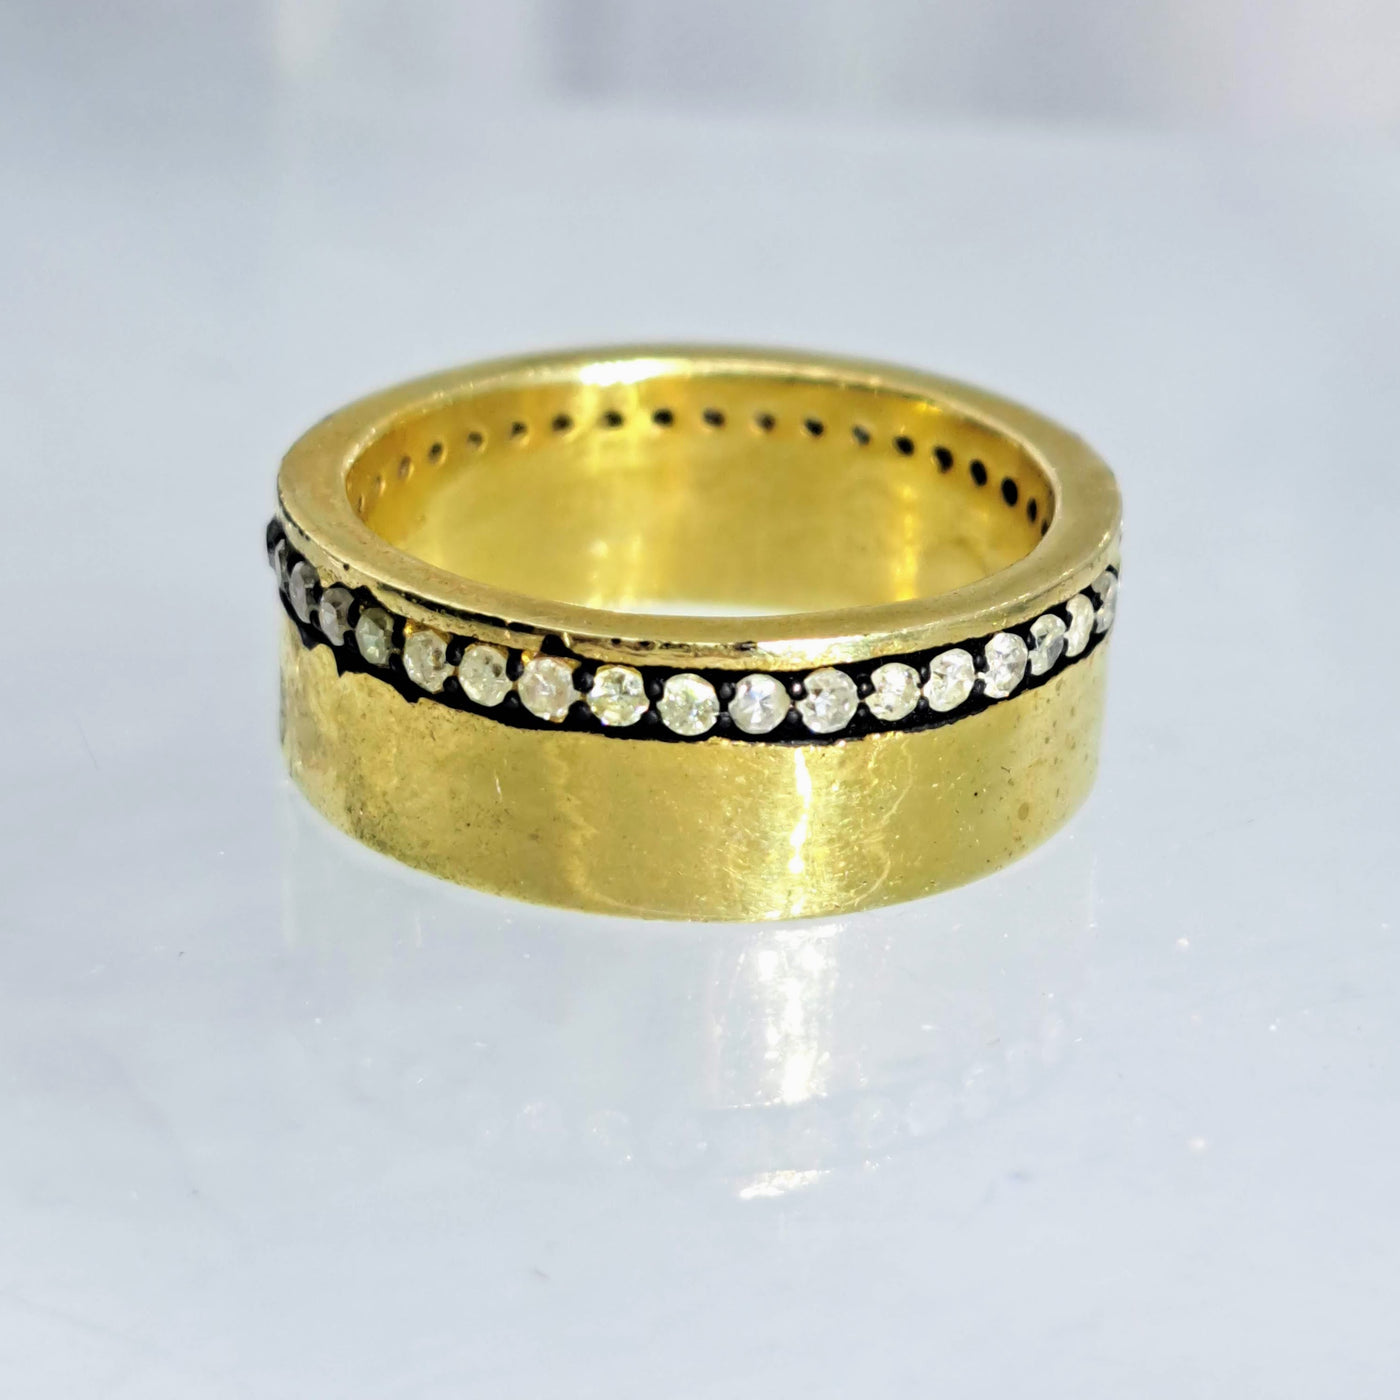 "The Band" Sz 7 Ring - Natural diamonds, 18K Gold Sterling